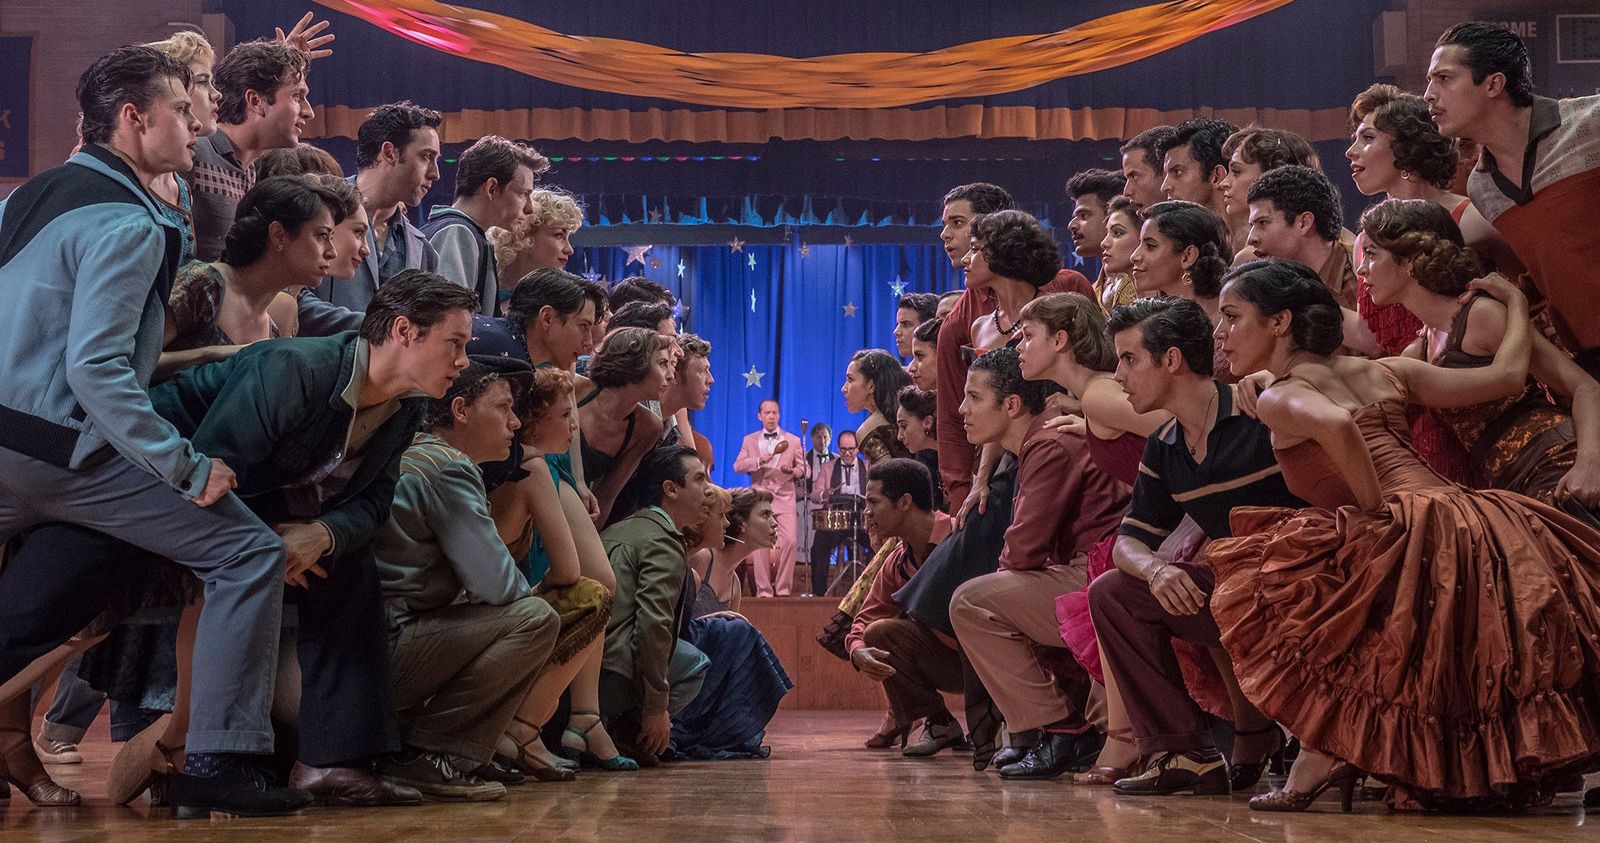 West Side Story cast, the men on one side of the dance hall and the women on the other